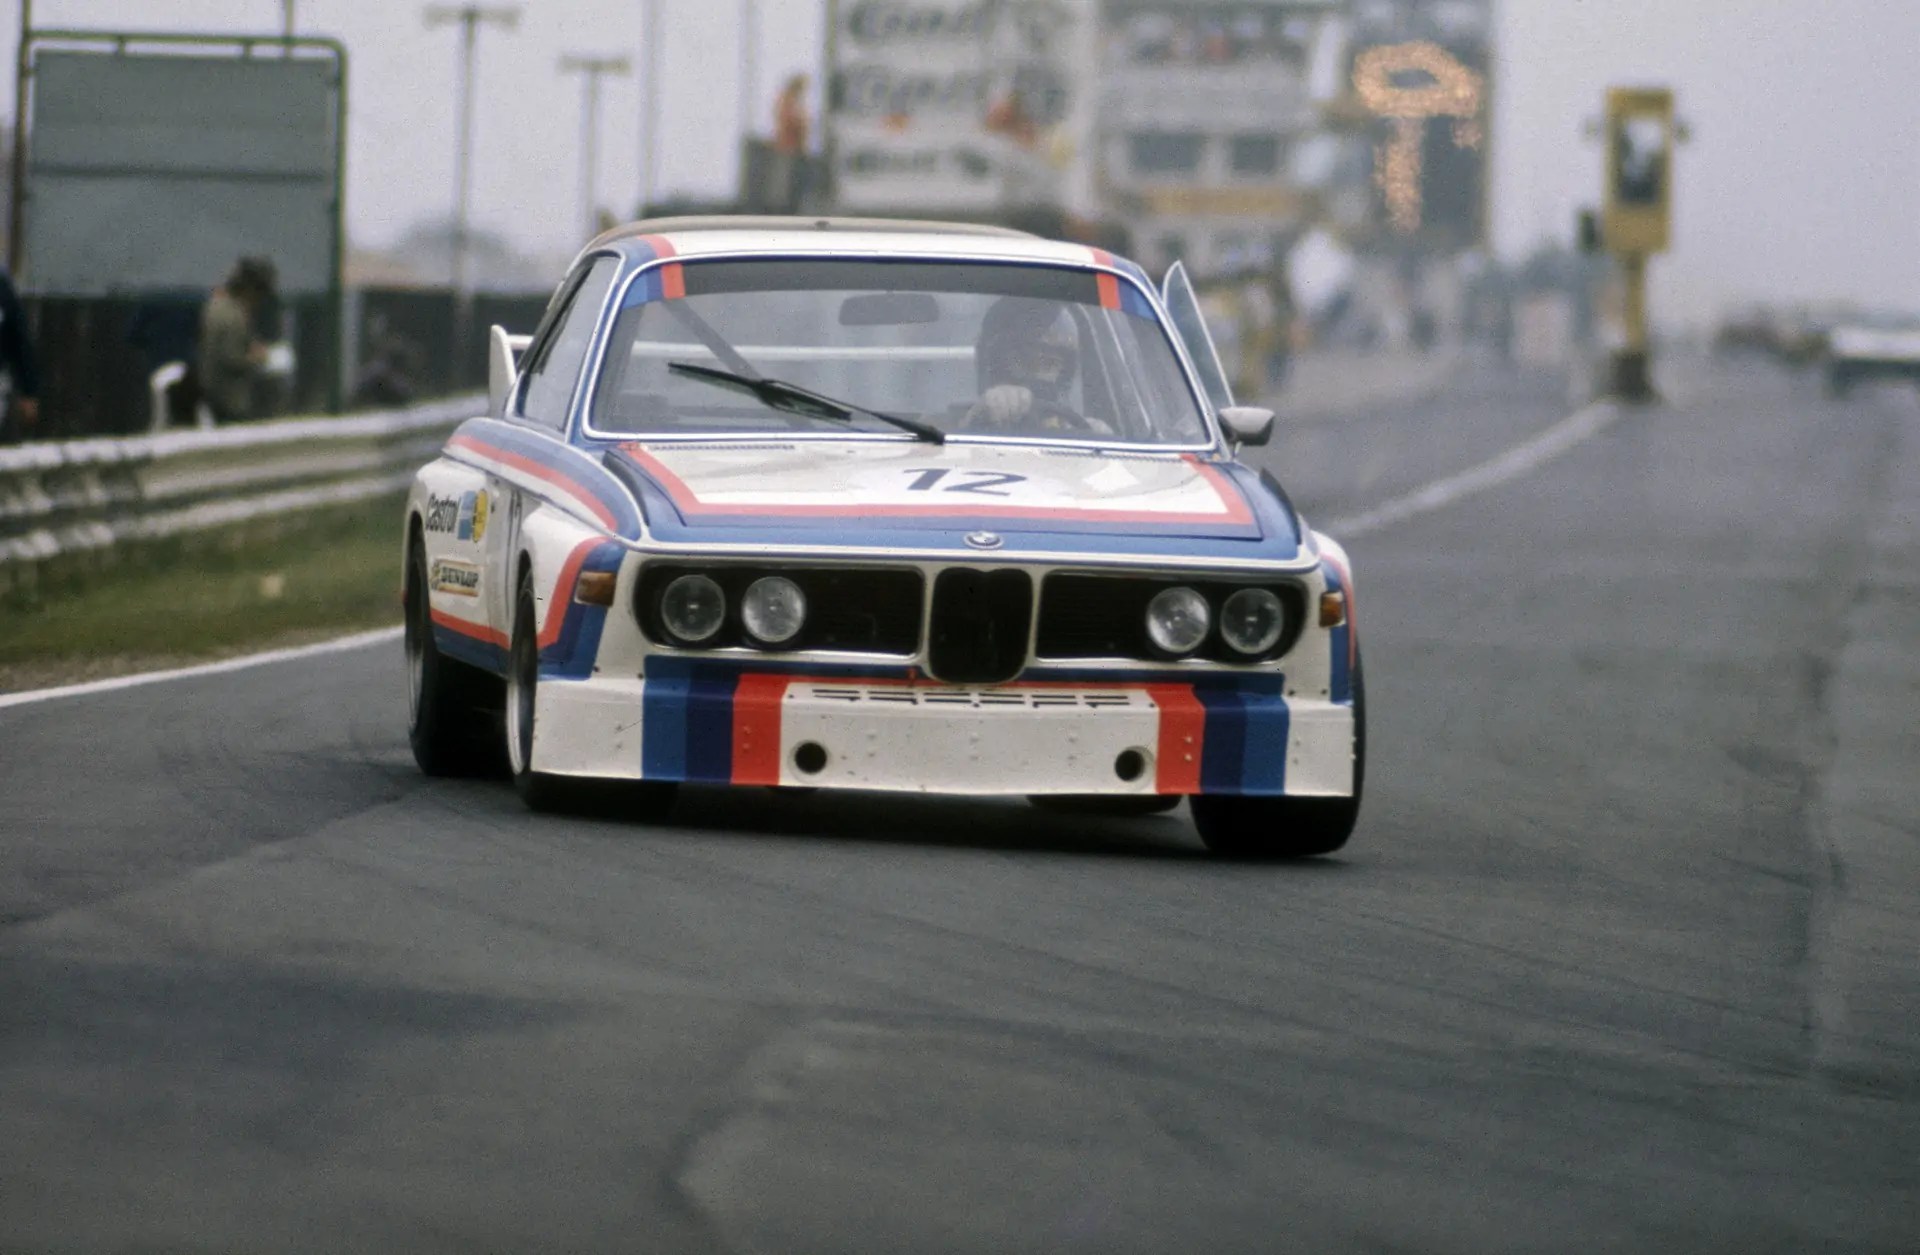 A 1973 BMW 3.0 CSL competing at the Nurburgring